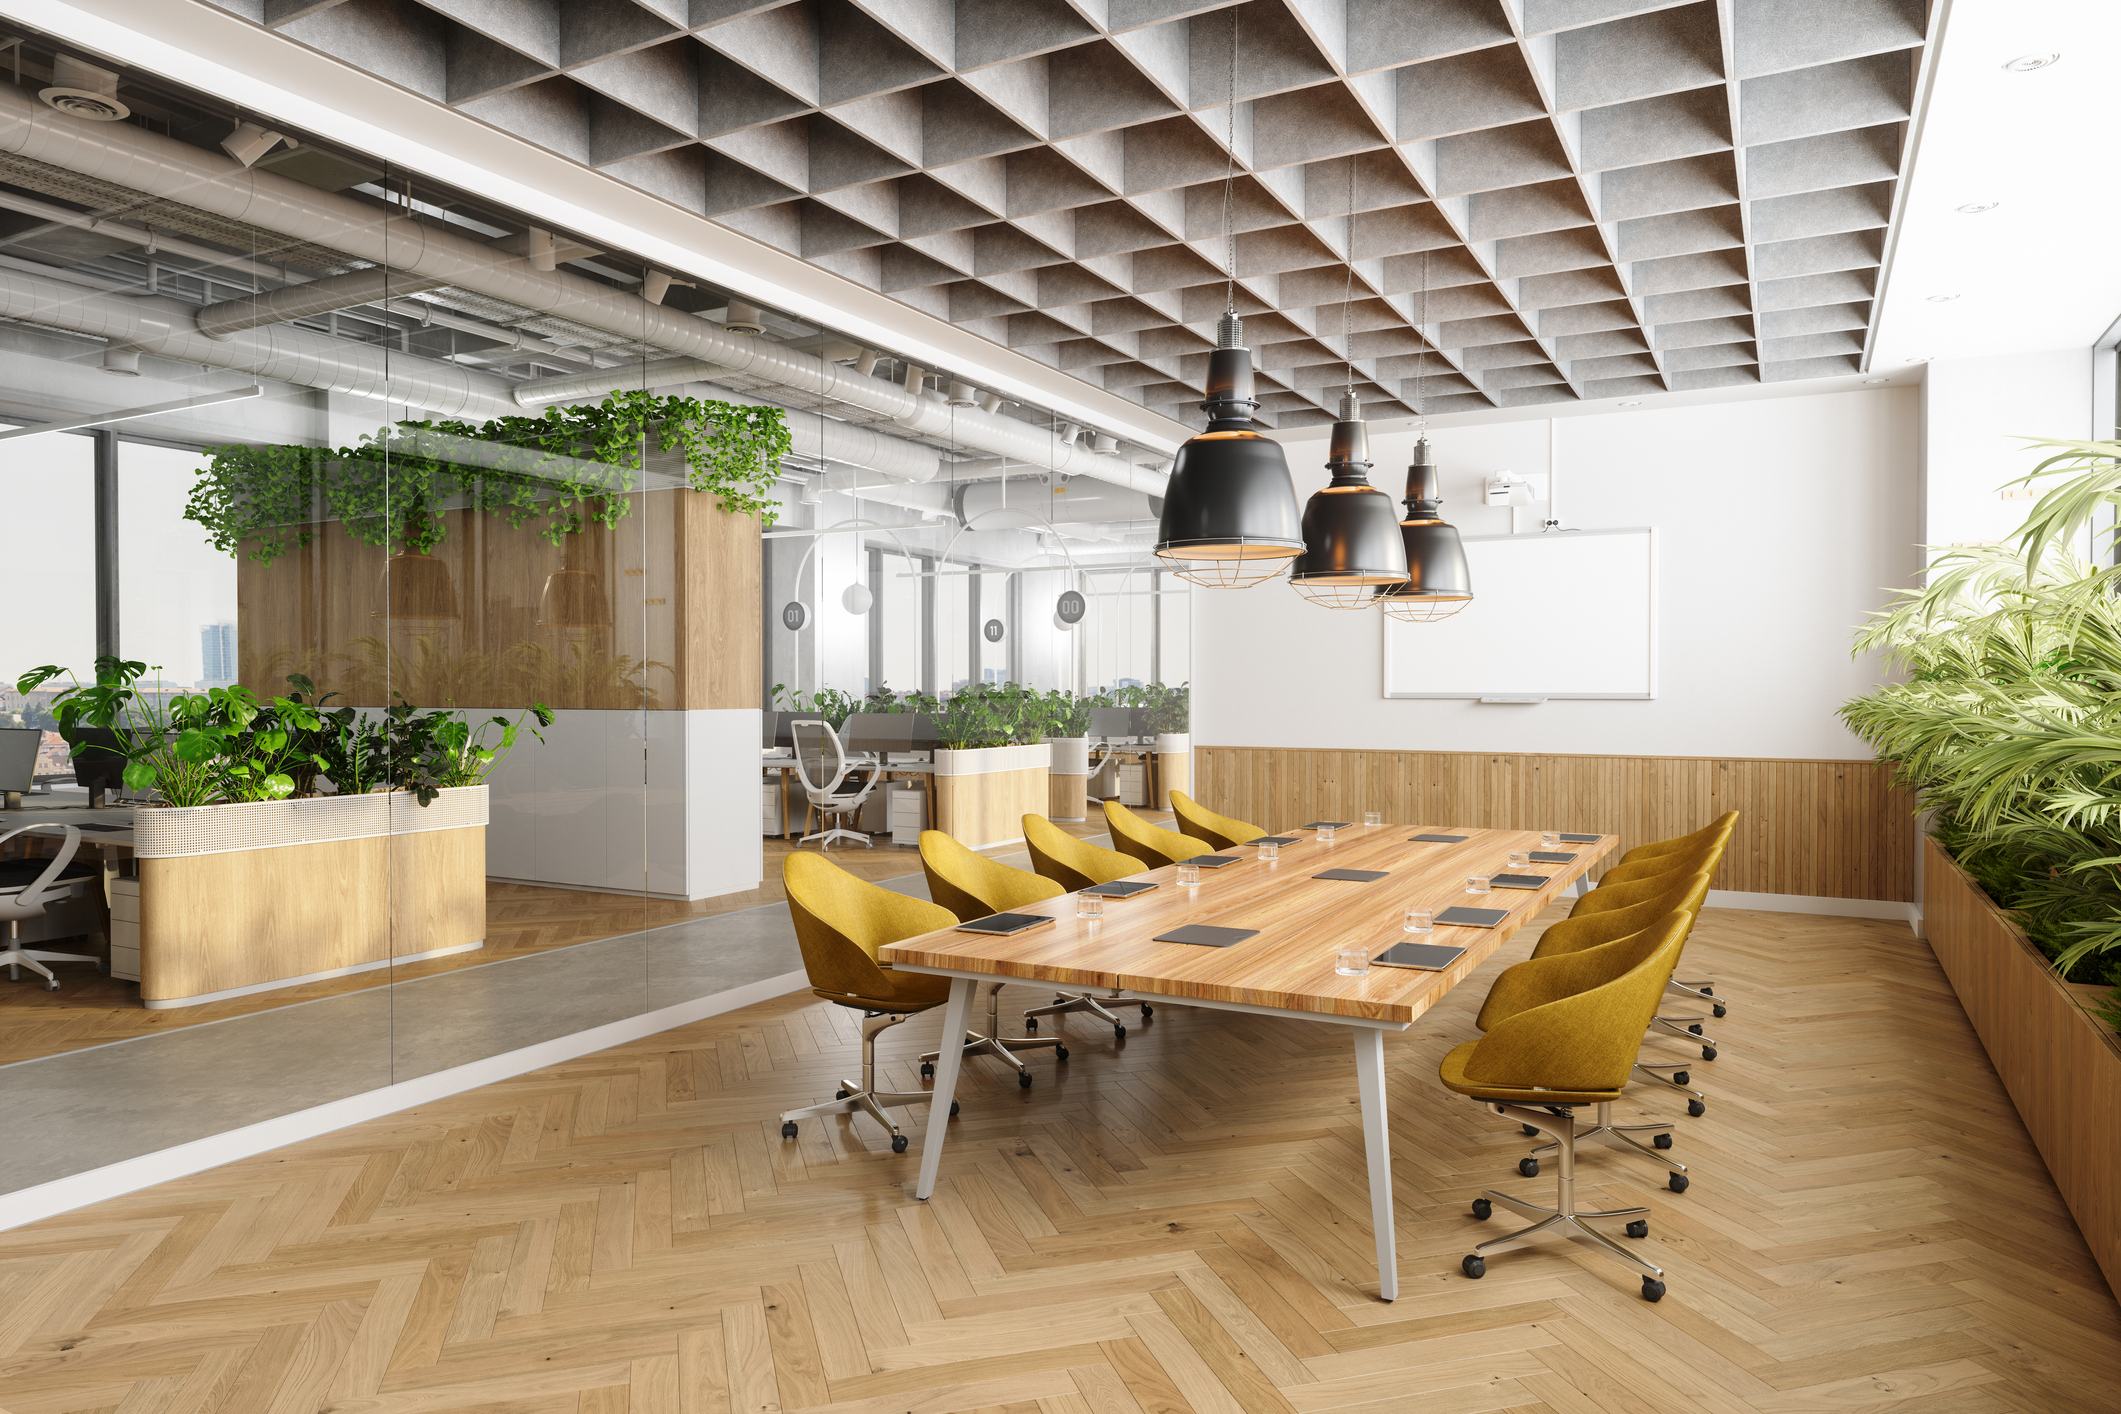 Eco-Friendly Open Plan Modern Office Interior With Meeting Room. Wooden Meeting Table, Yellow Chairs, Plants And Parquet Floor